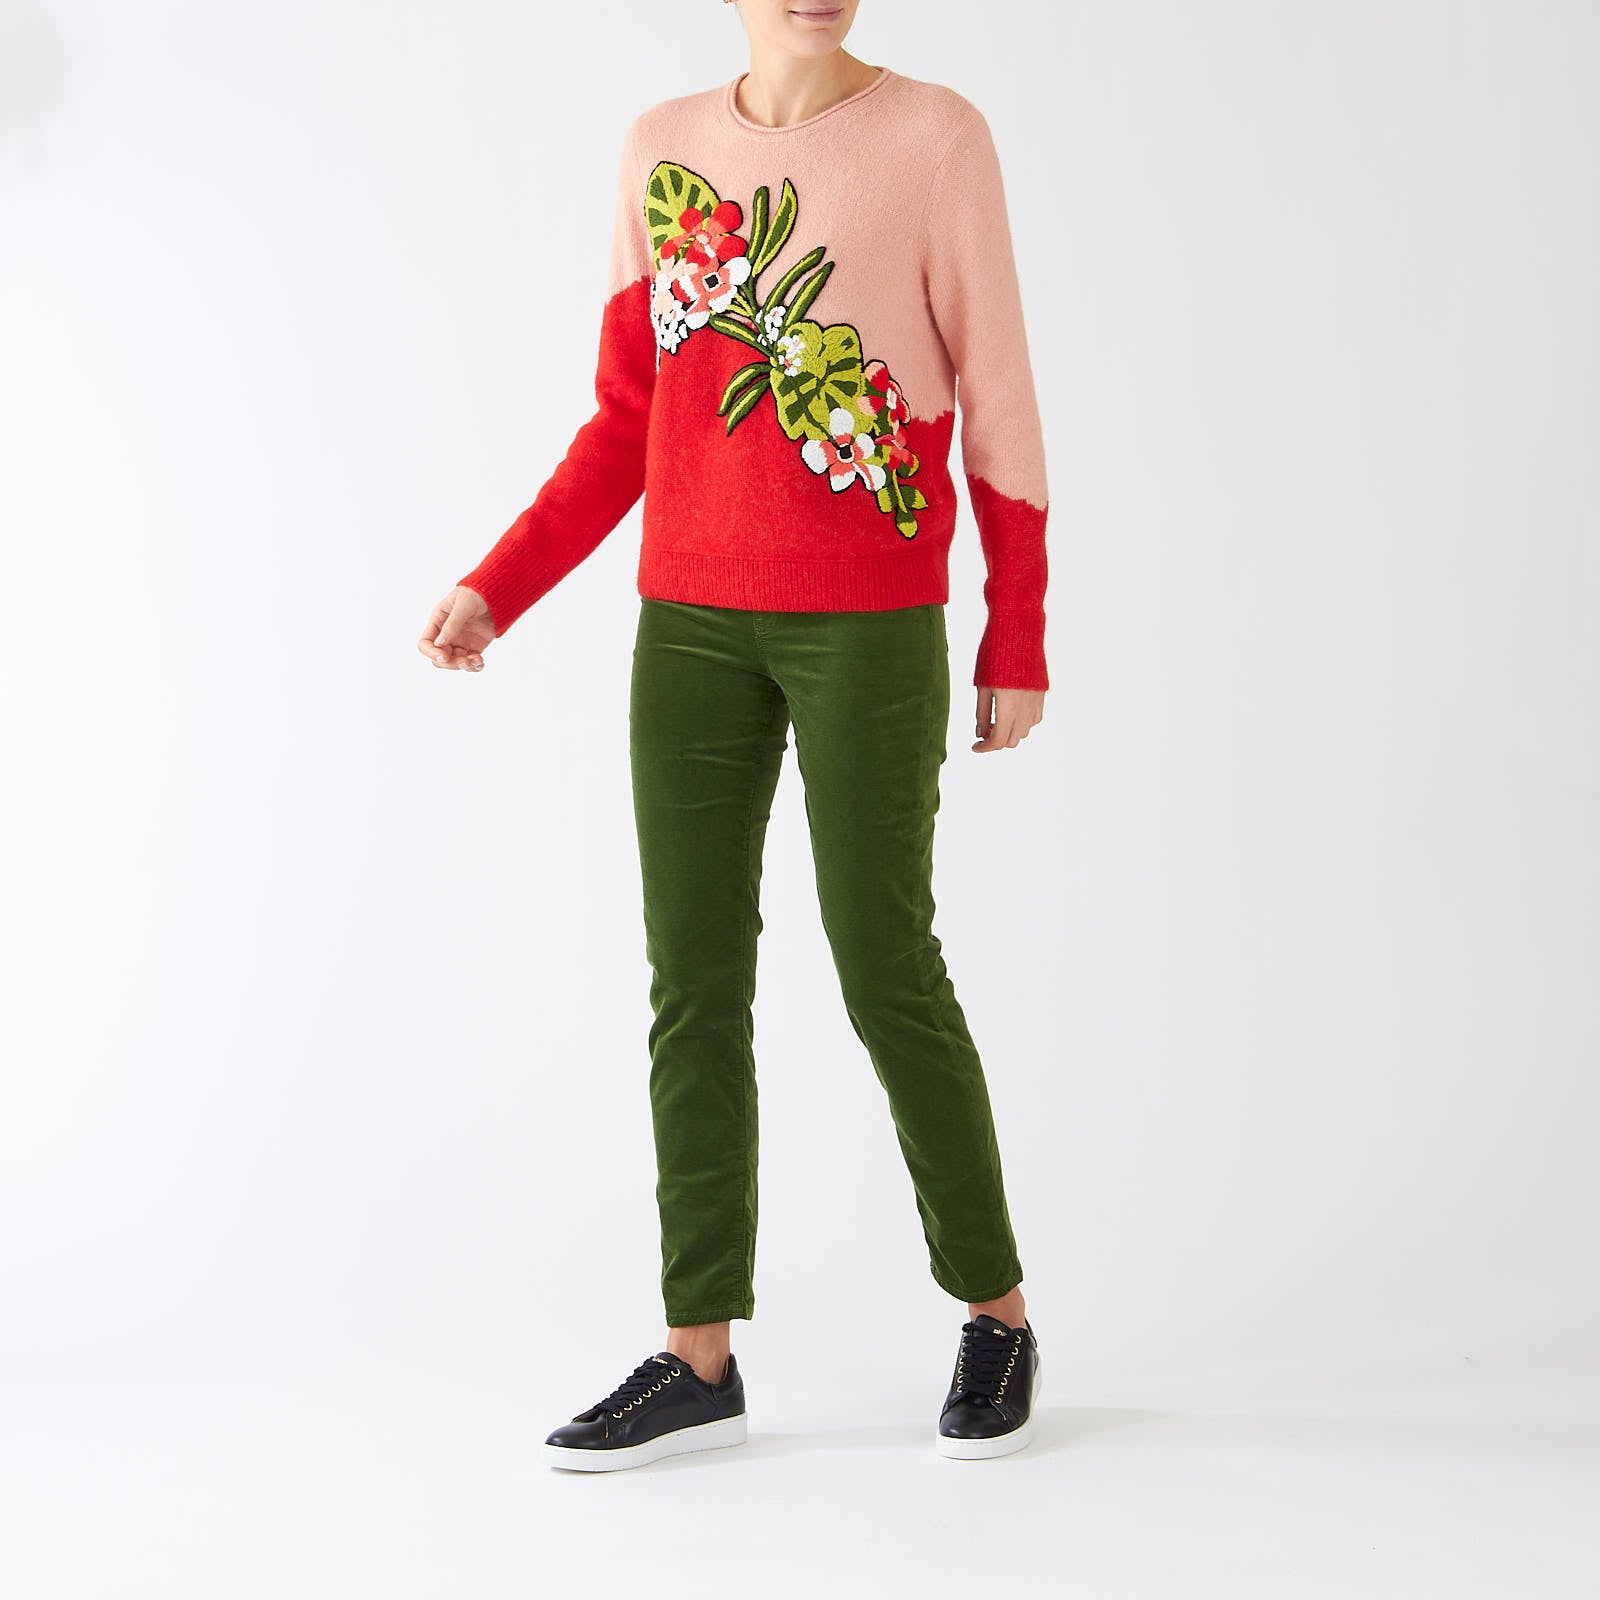 Bright Fire Red Floral Embroidered Sweater